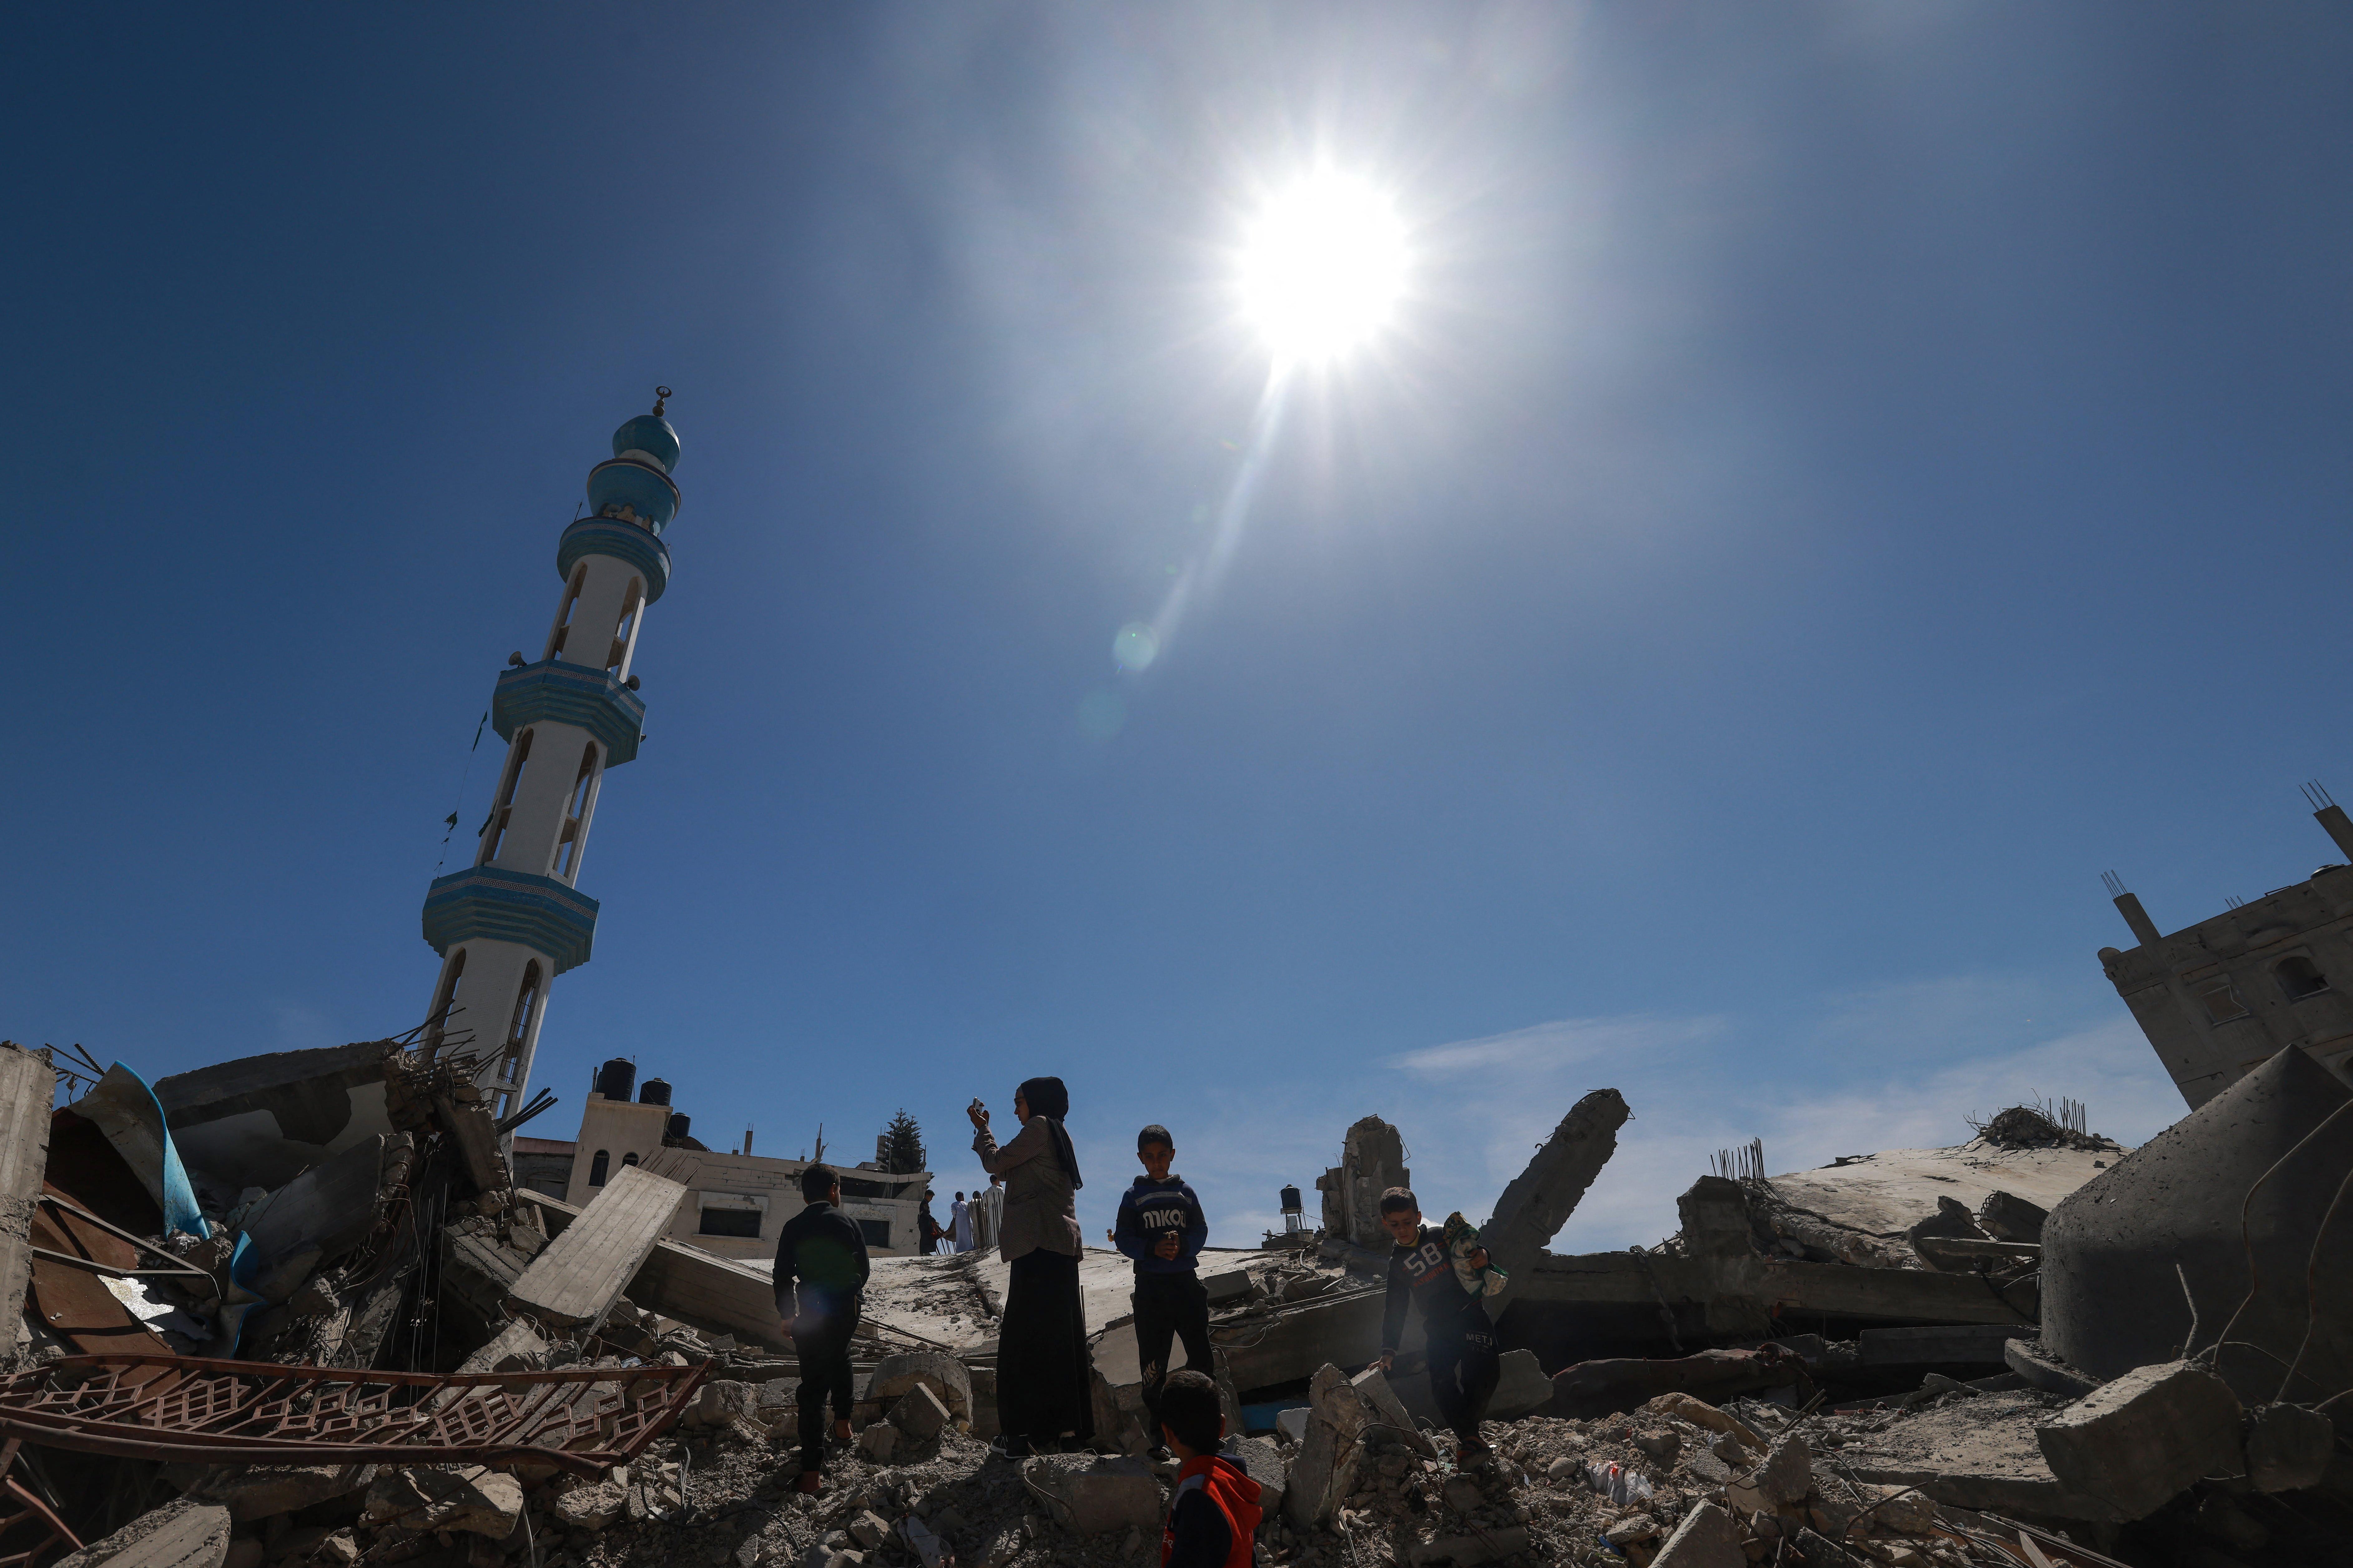 A woman and several children walk over rubble with a minaret in the background.